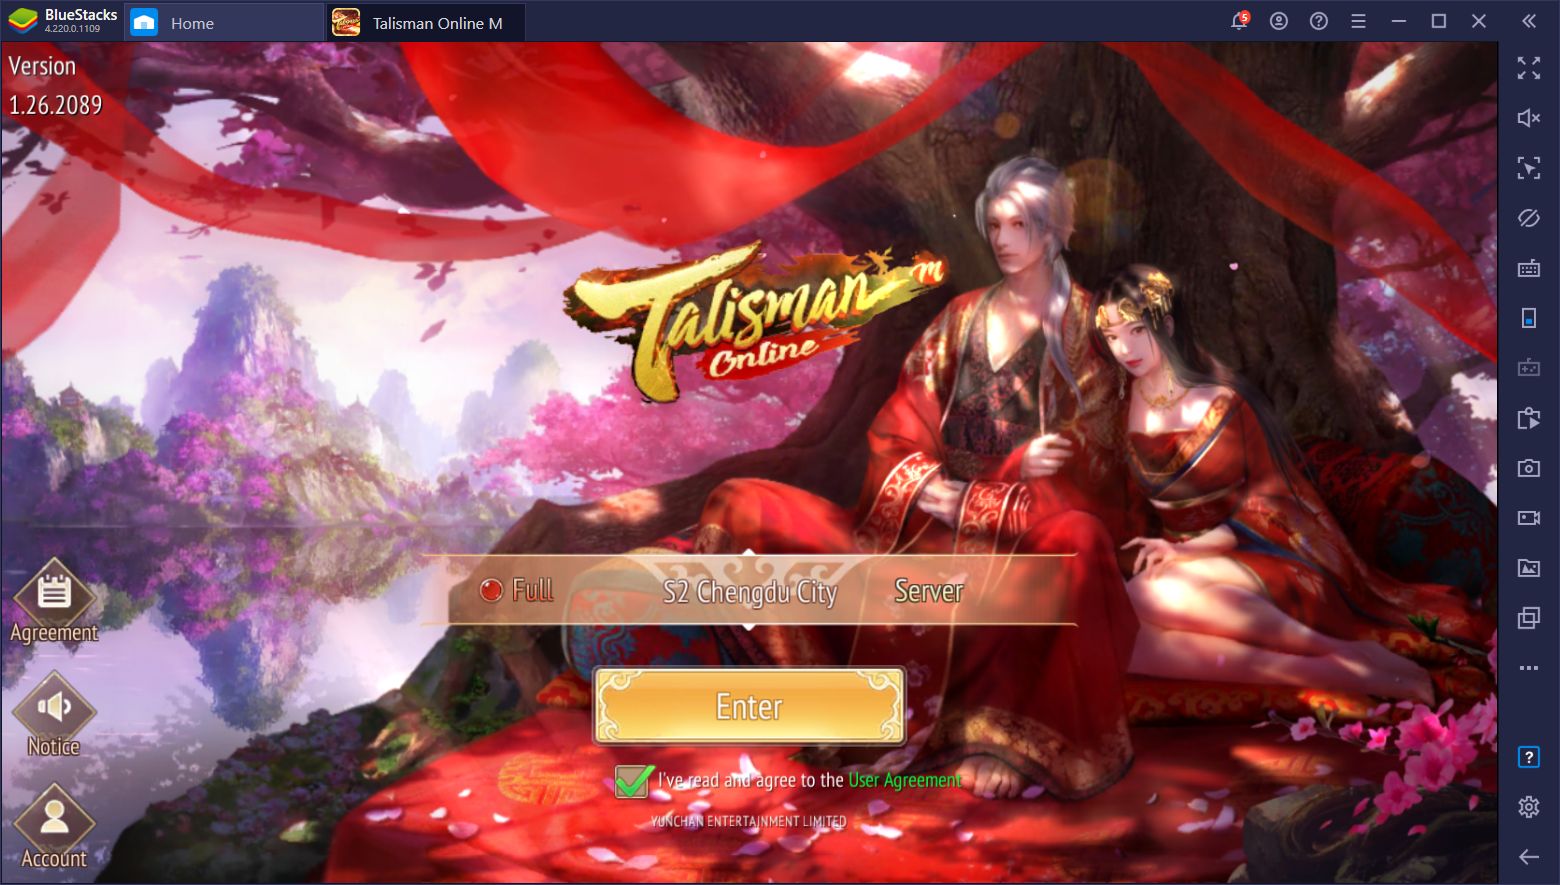 Talisman Online M on PC - How to Install and Play This New Mobile MMORPG on PC With BlueStacks